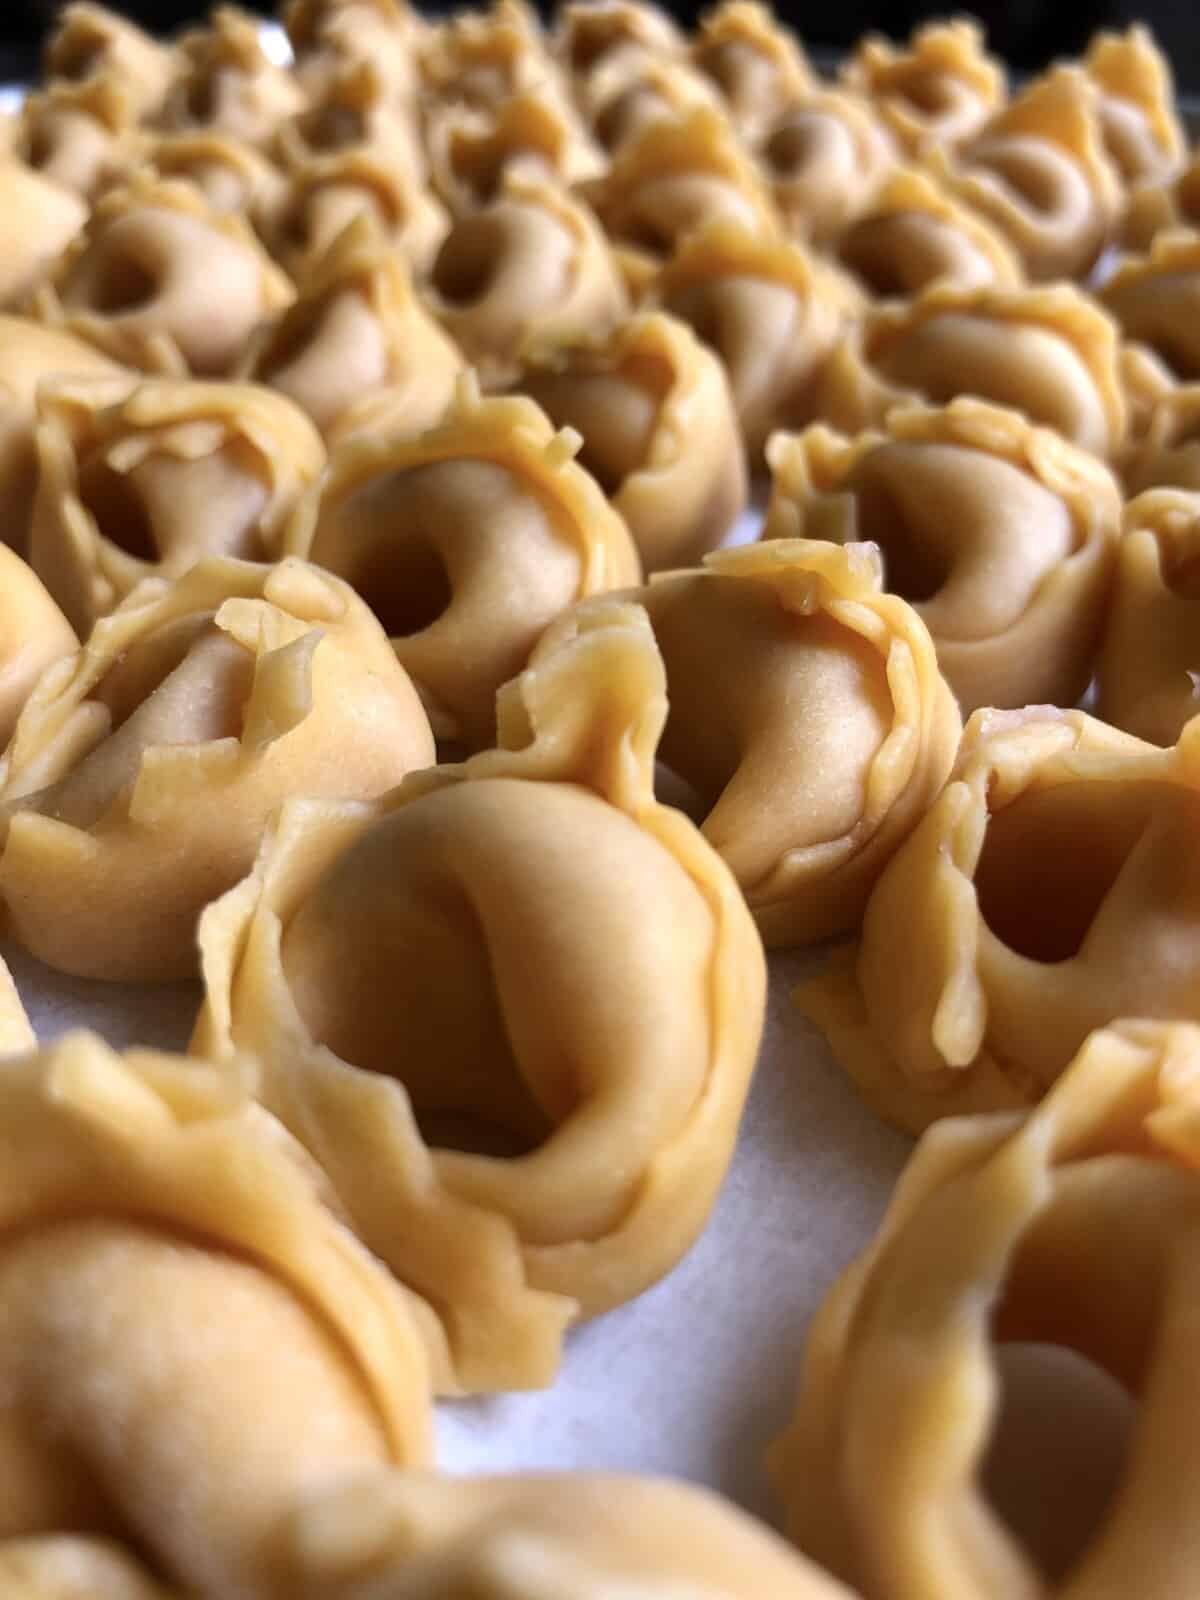 Homemade tortellini on a tray waiting to be cooked or frozen.